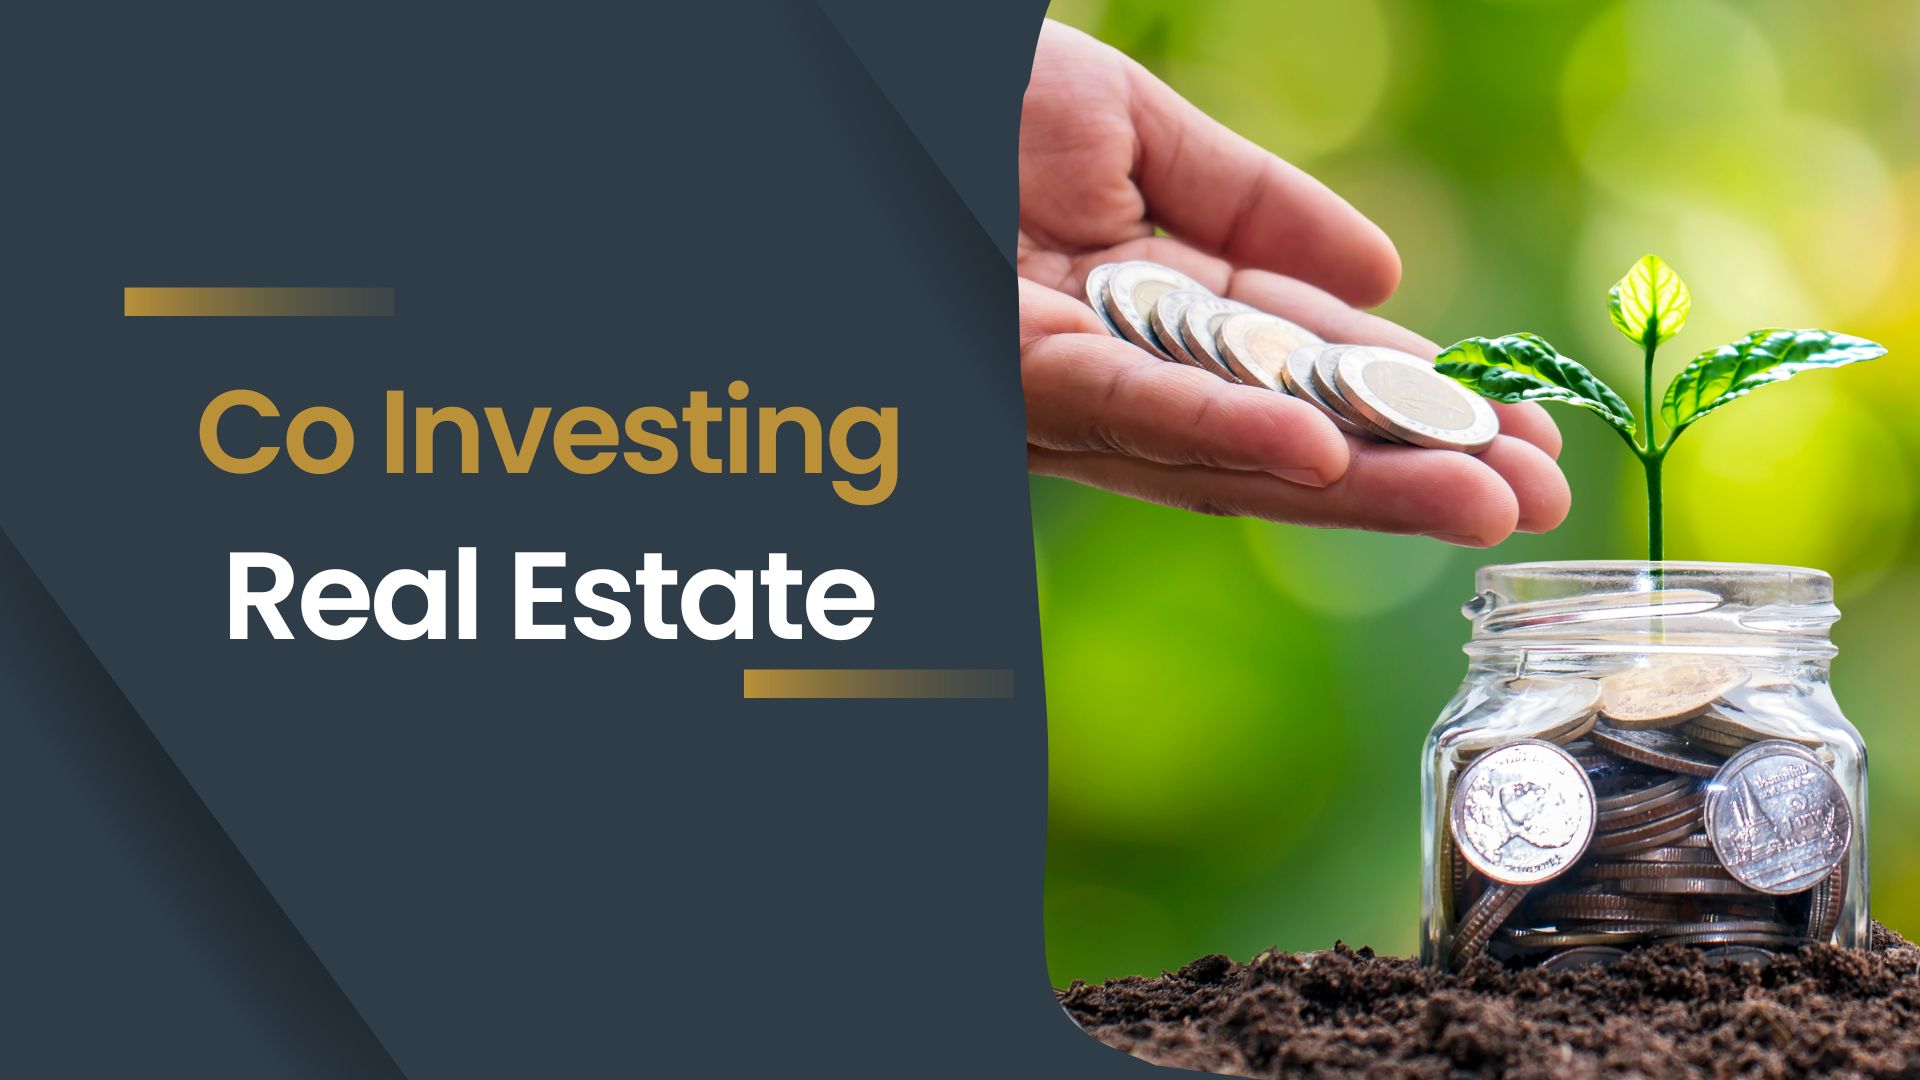 Co Investing in Real Estate